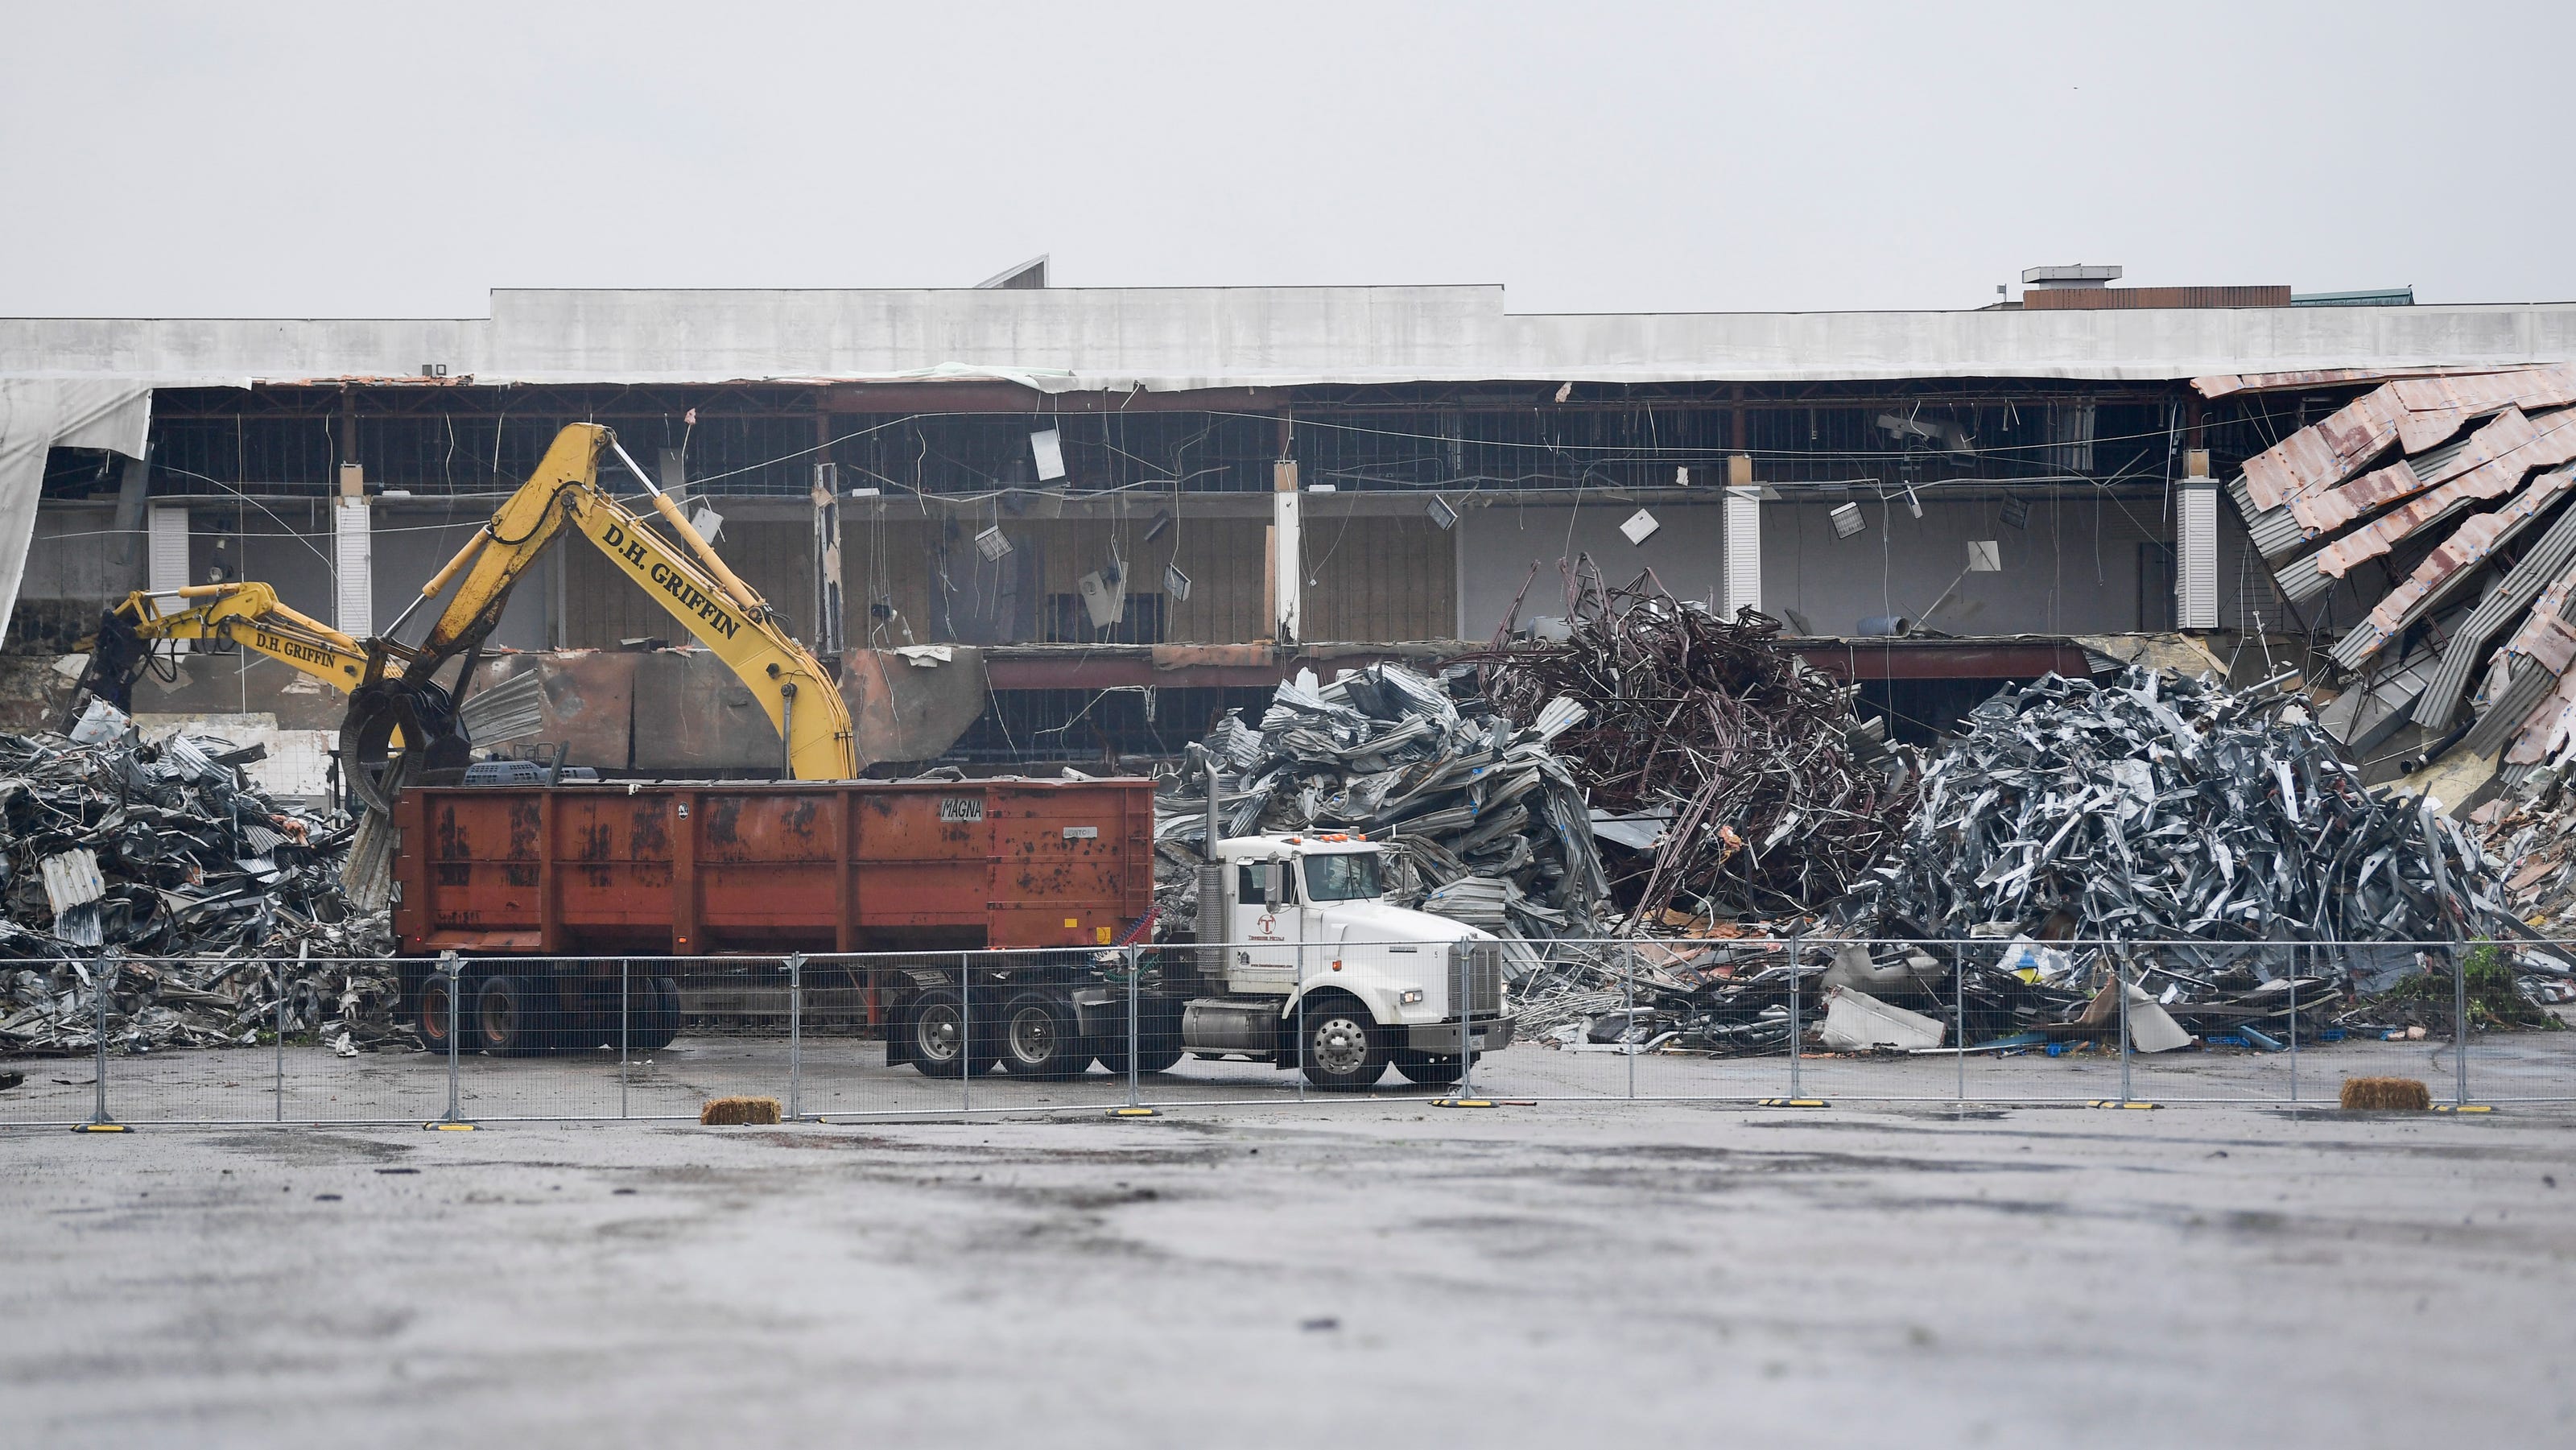 Knoxville Center Mall, AKA East Towne, demolition begins for Amazon